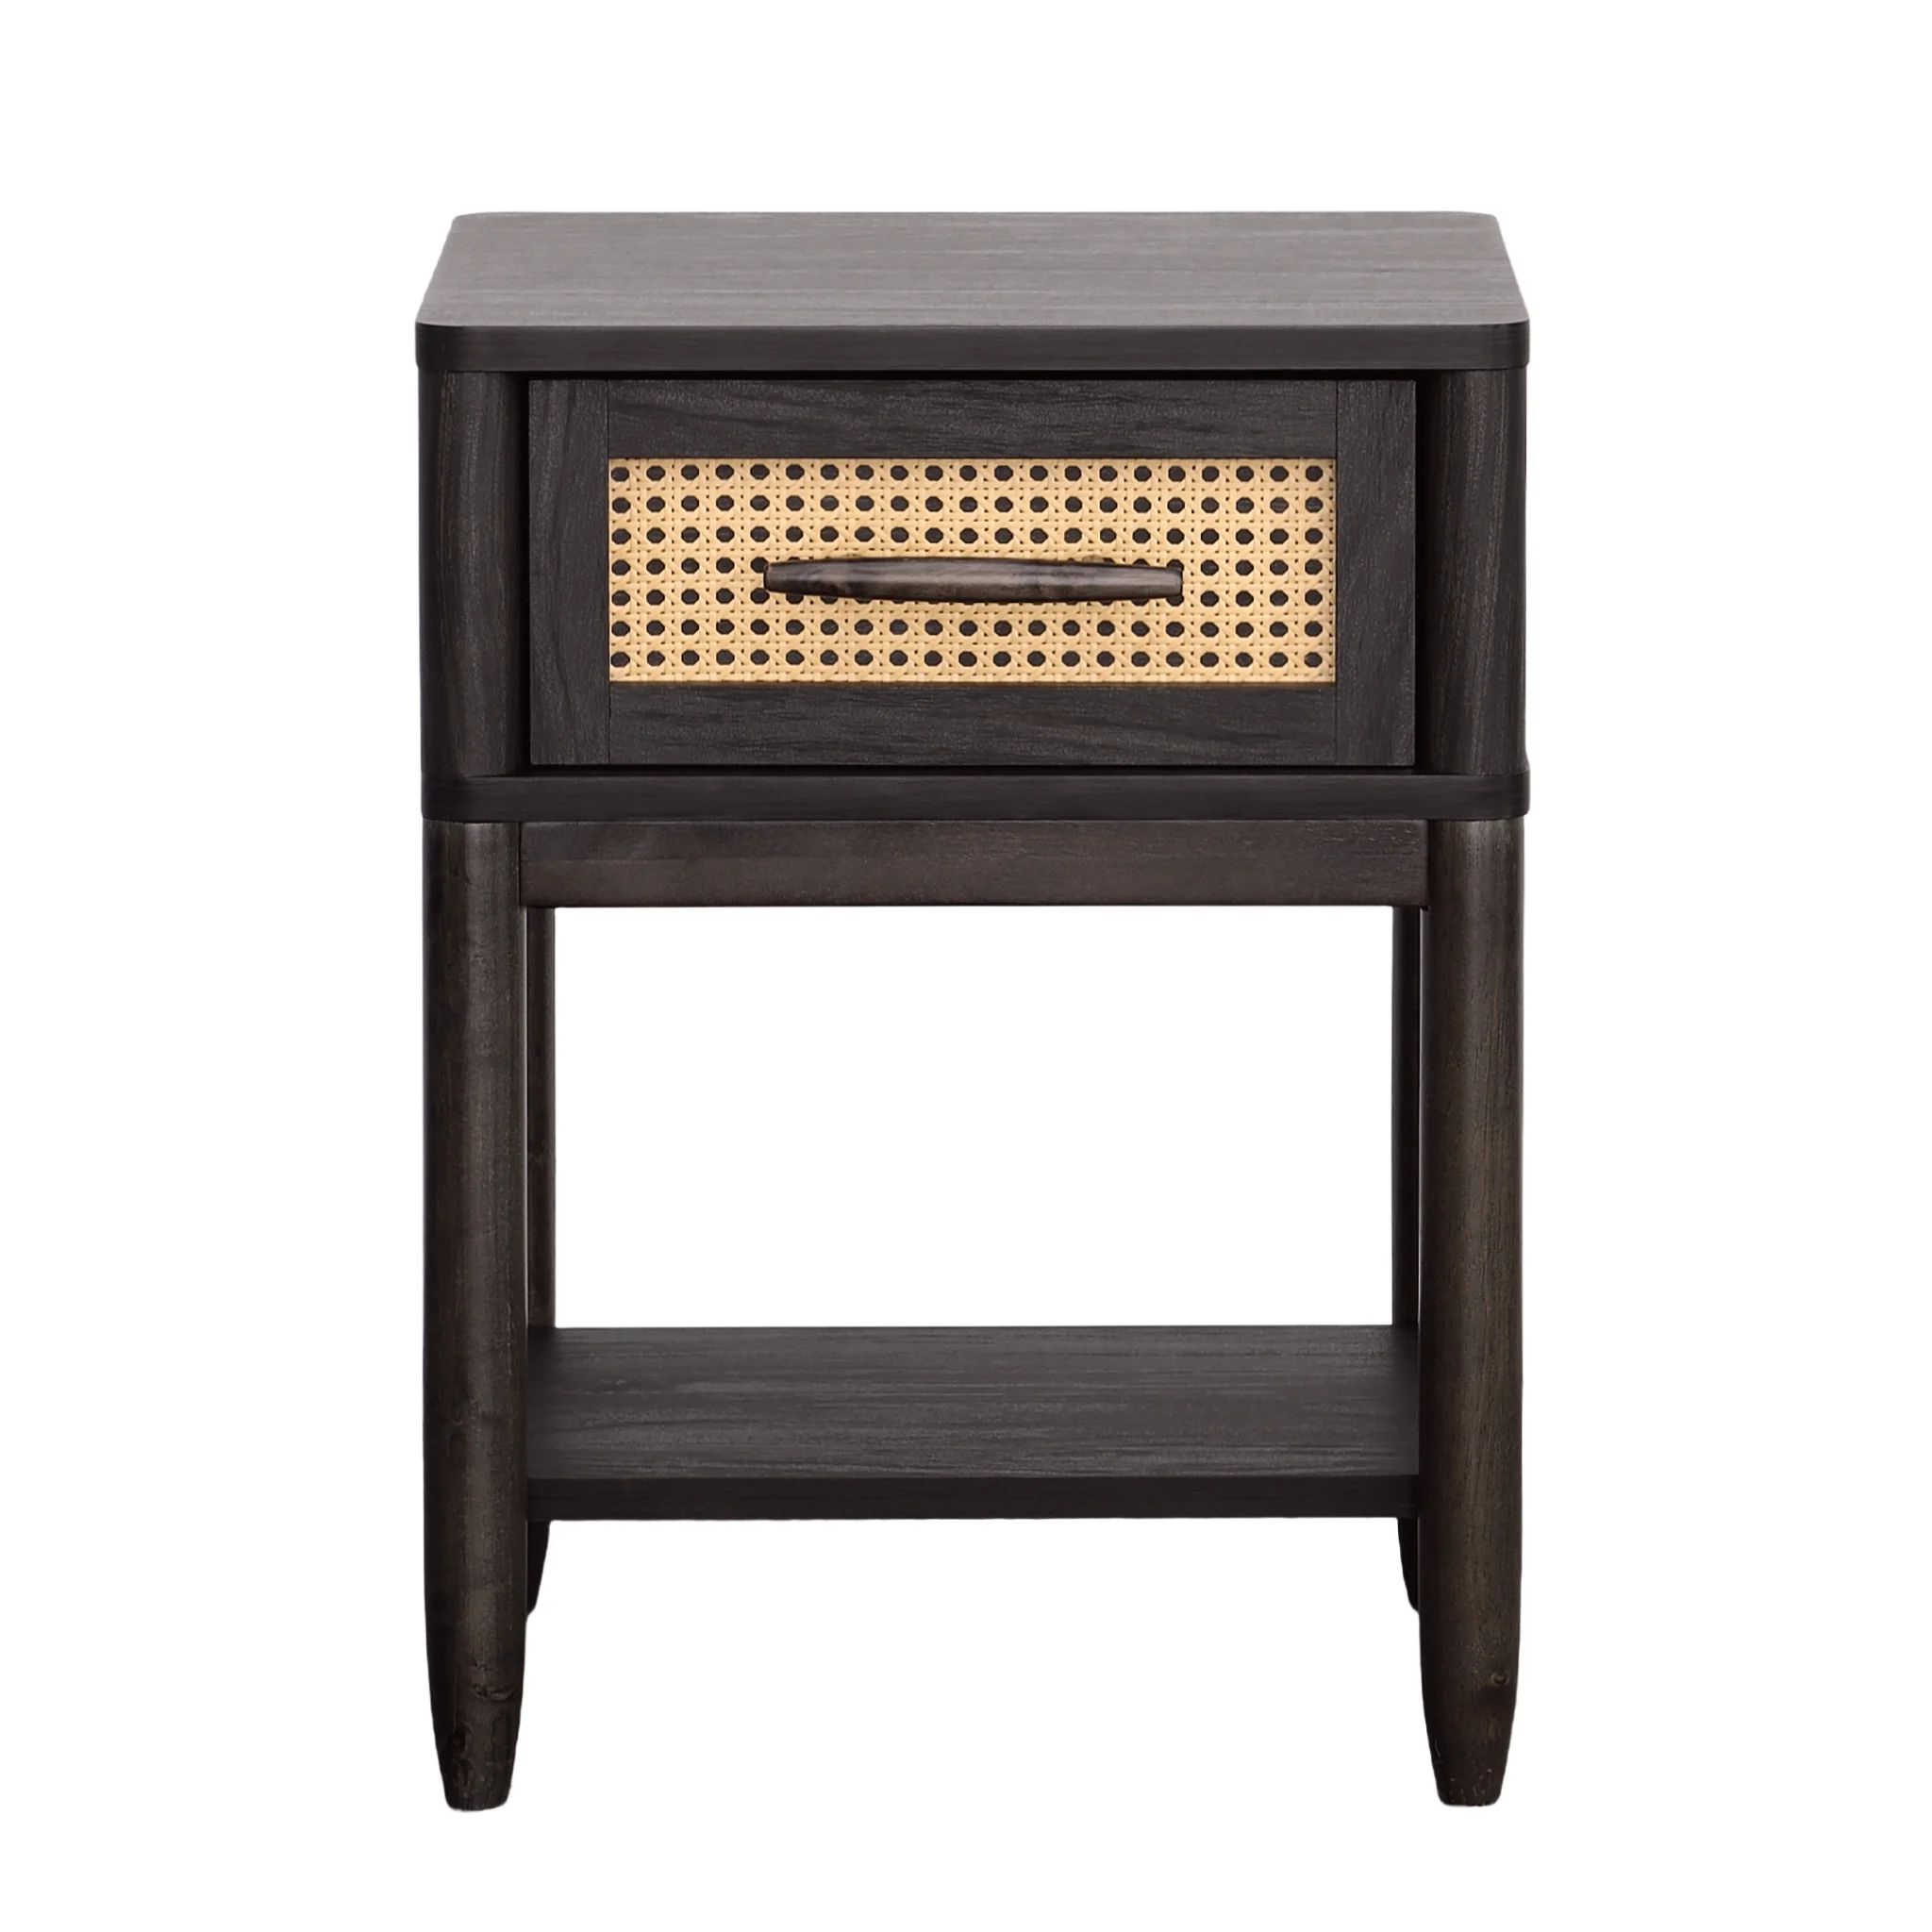 Better Homes & Gardens Springwood Caning Night Stand, Charcoal Finish | Walmart (US)